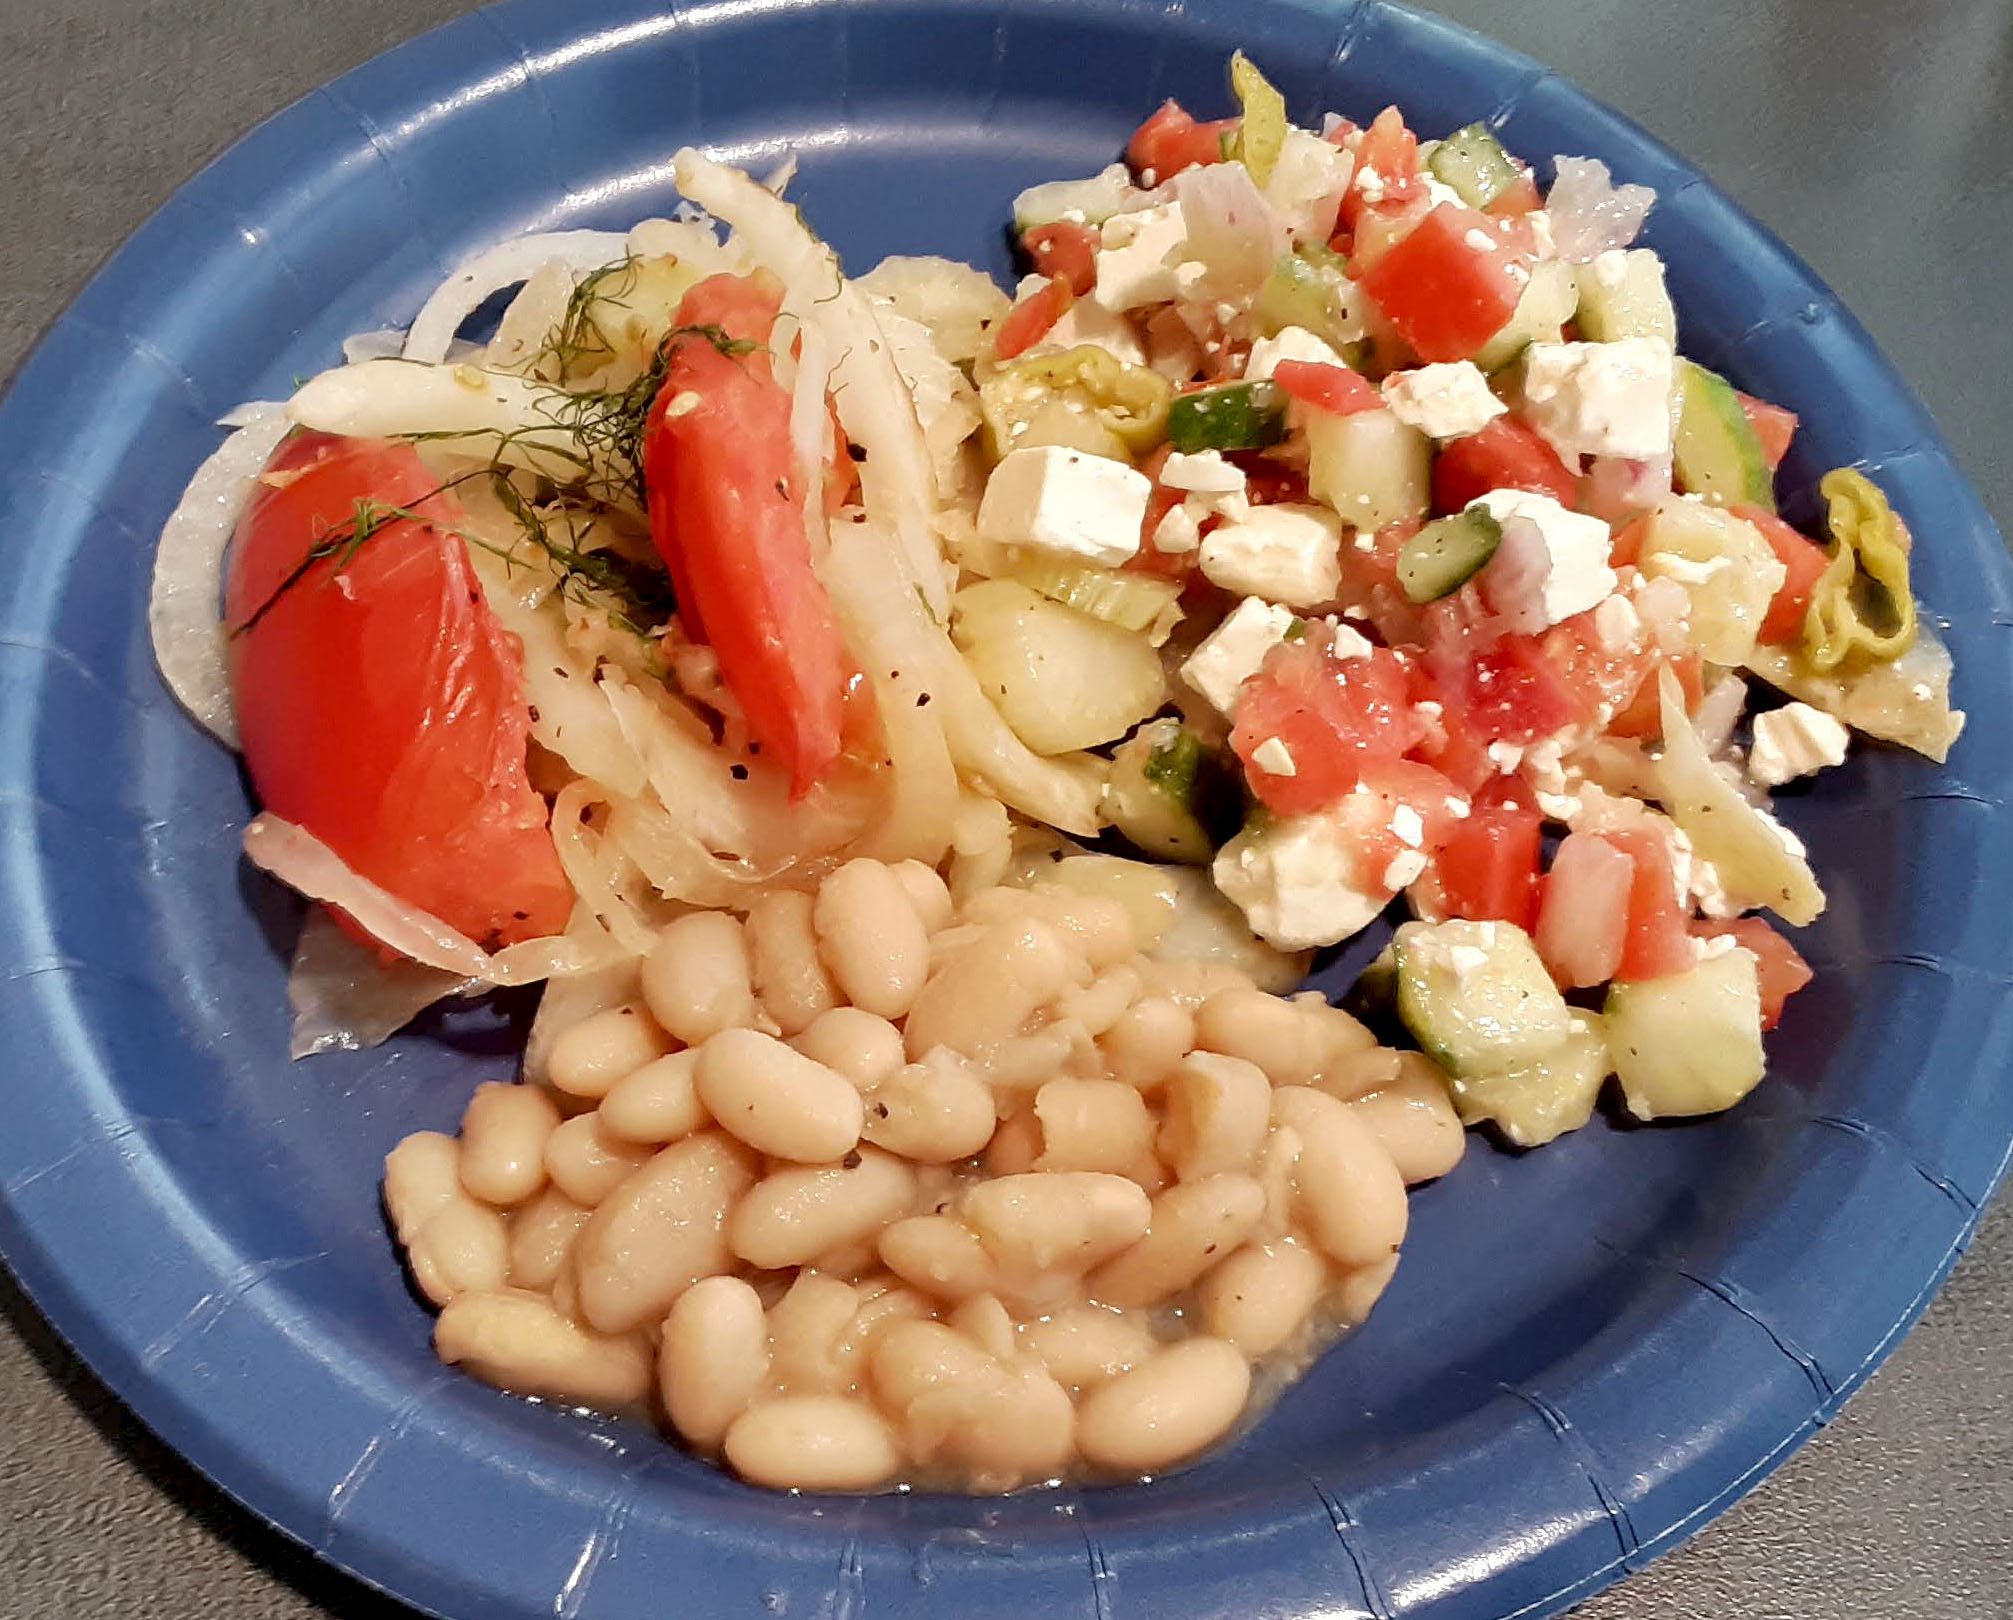 On a paper plate, there is a scoop of canella beans, a Greek salad, and a pile of veggies. Photo by Paul Young.